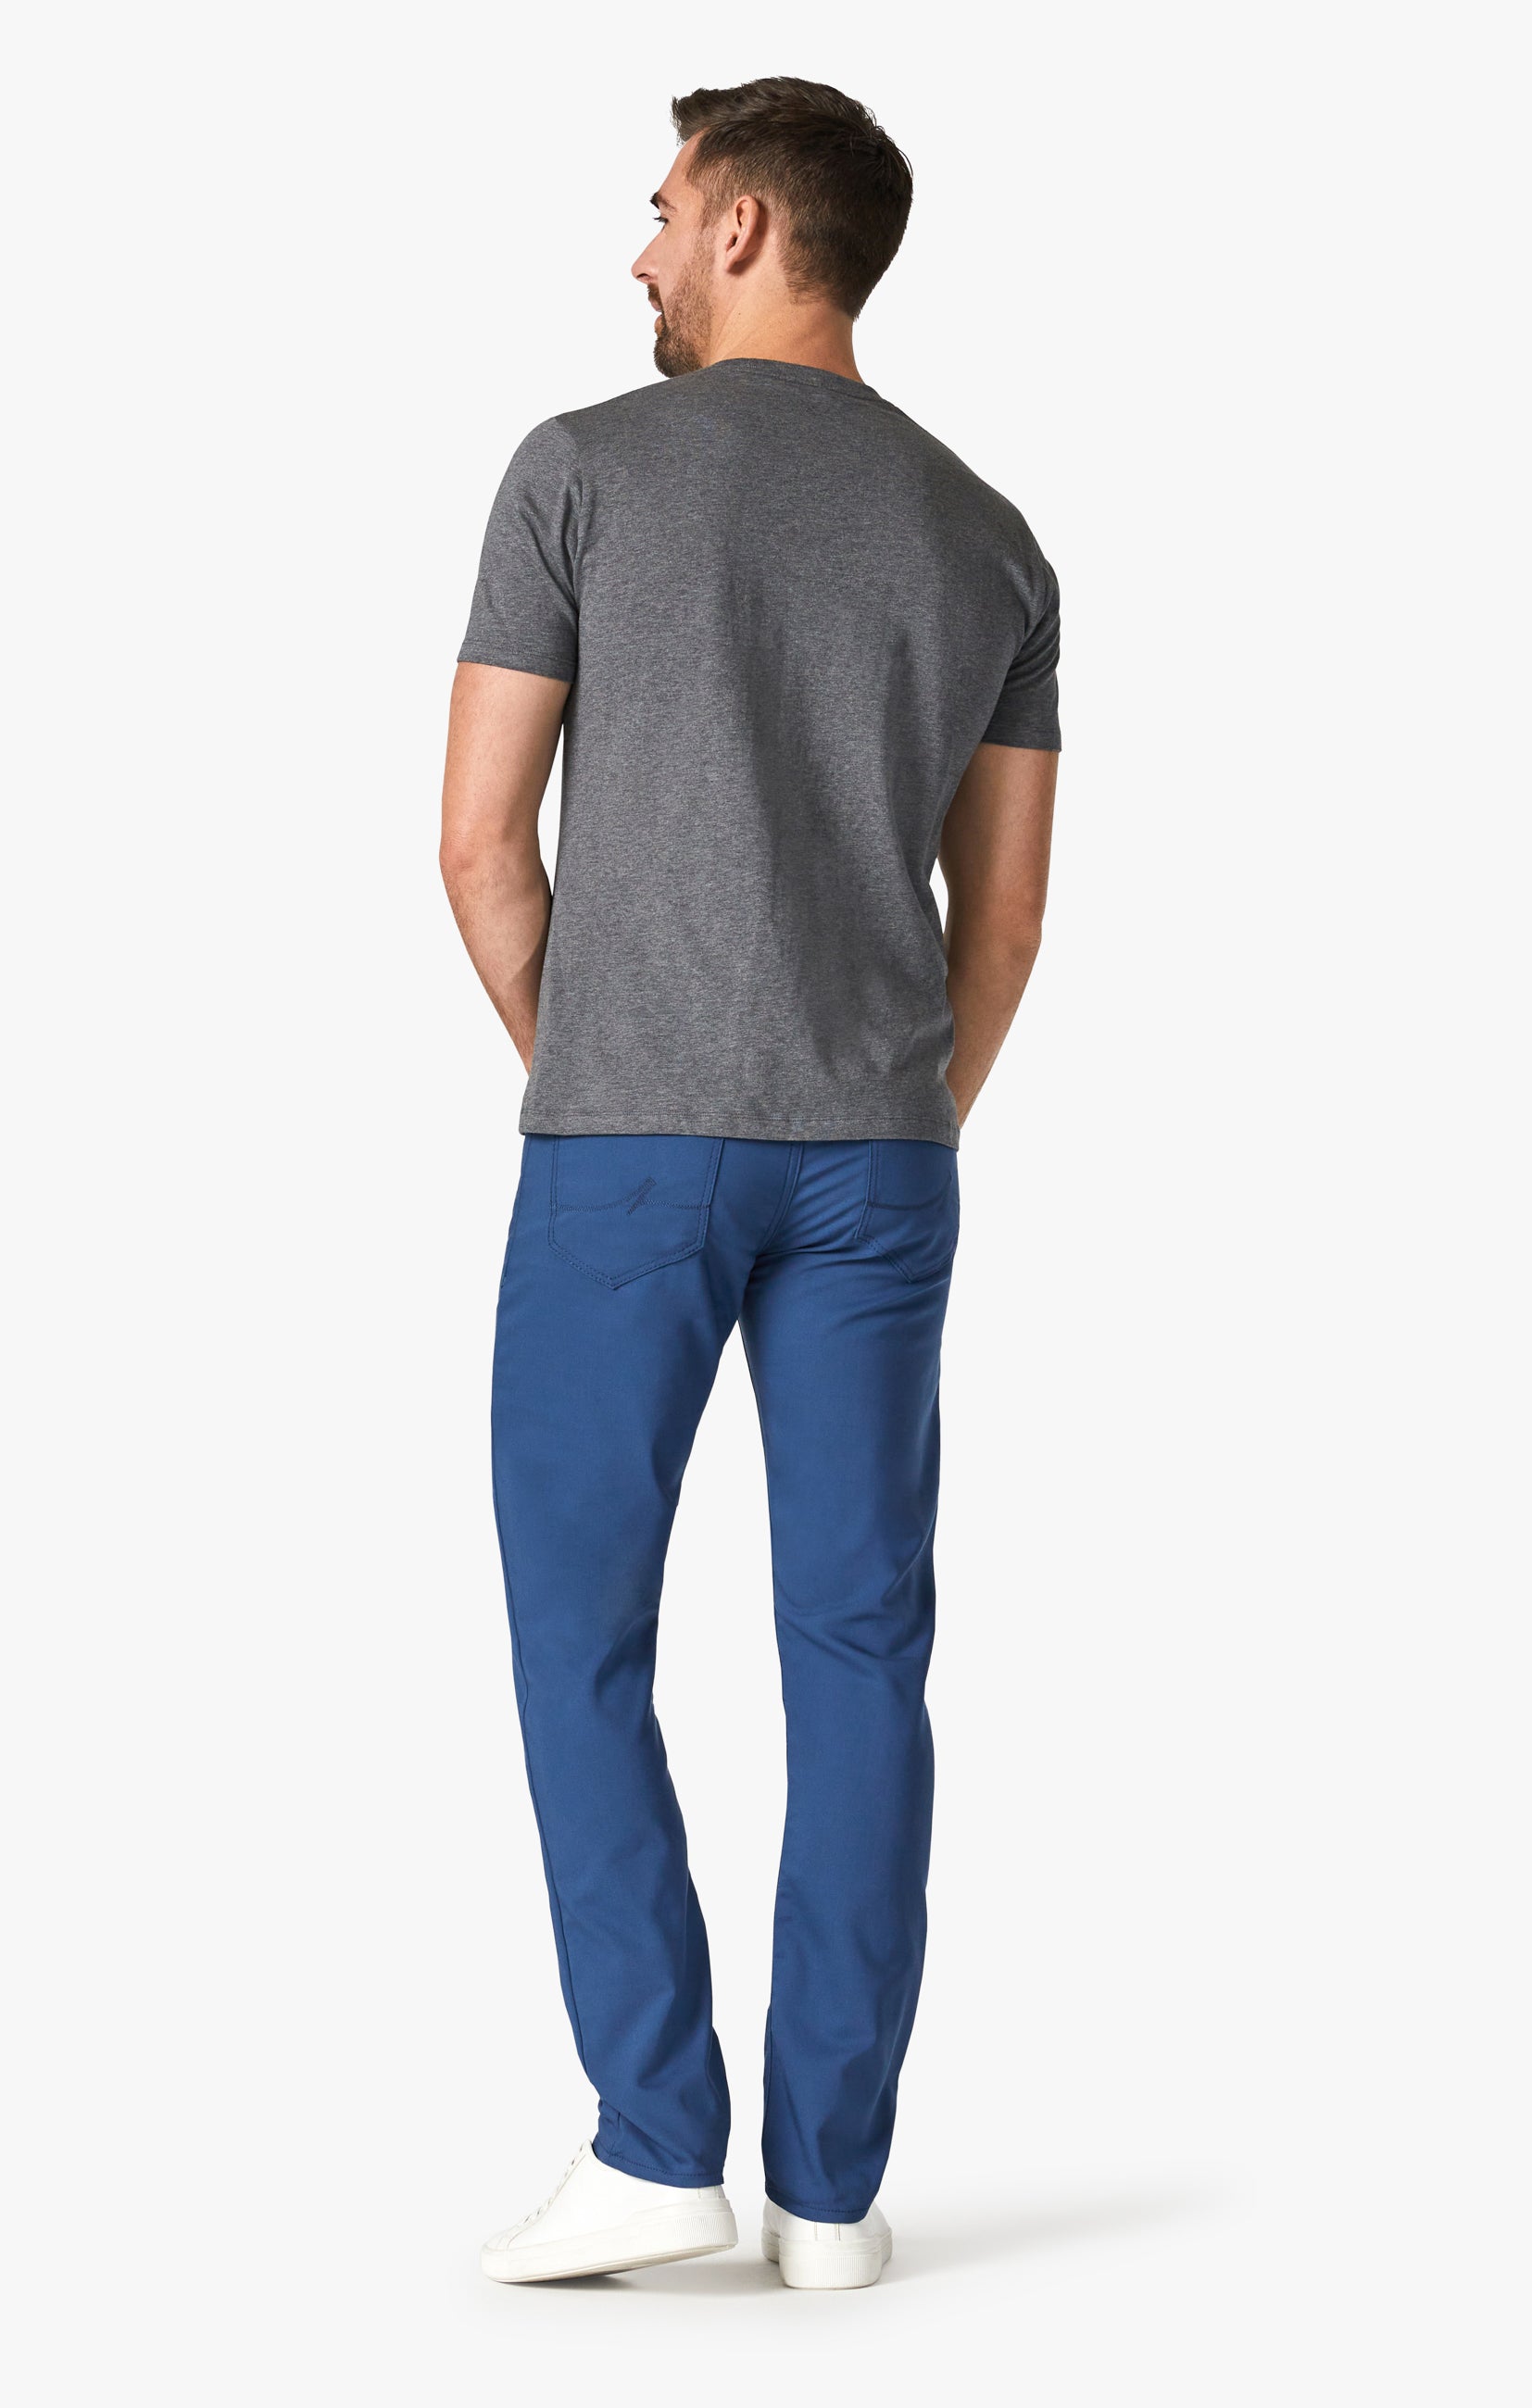 Courage Straight Leg Jeans in Cobalt Commuter Image 9